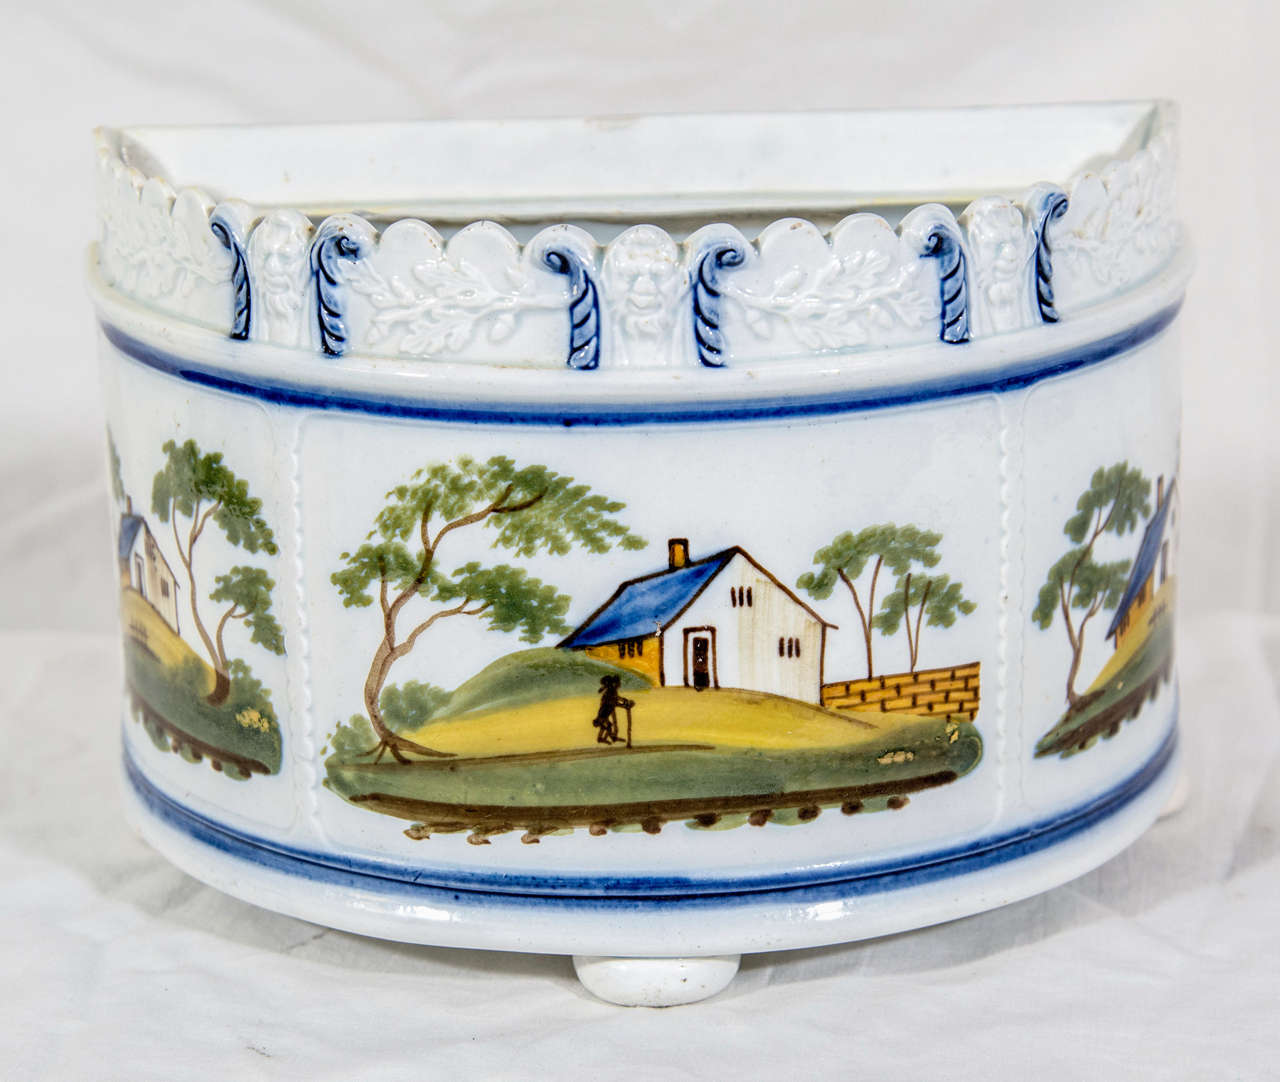 A pearlware demi-lune bough pot decorated with naive painted landscapes in Prattware colors,the top rim moulded with masks and branches of oak. It was made in England probably in Yorkshire circa 1815.
Pearlware is a type of creamware to which the